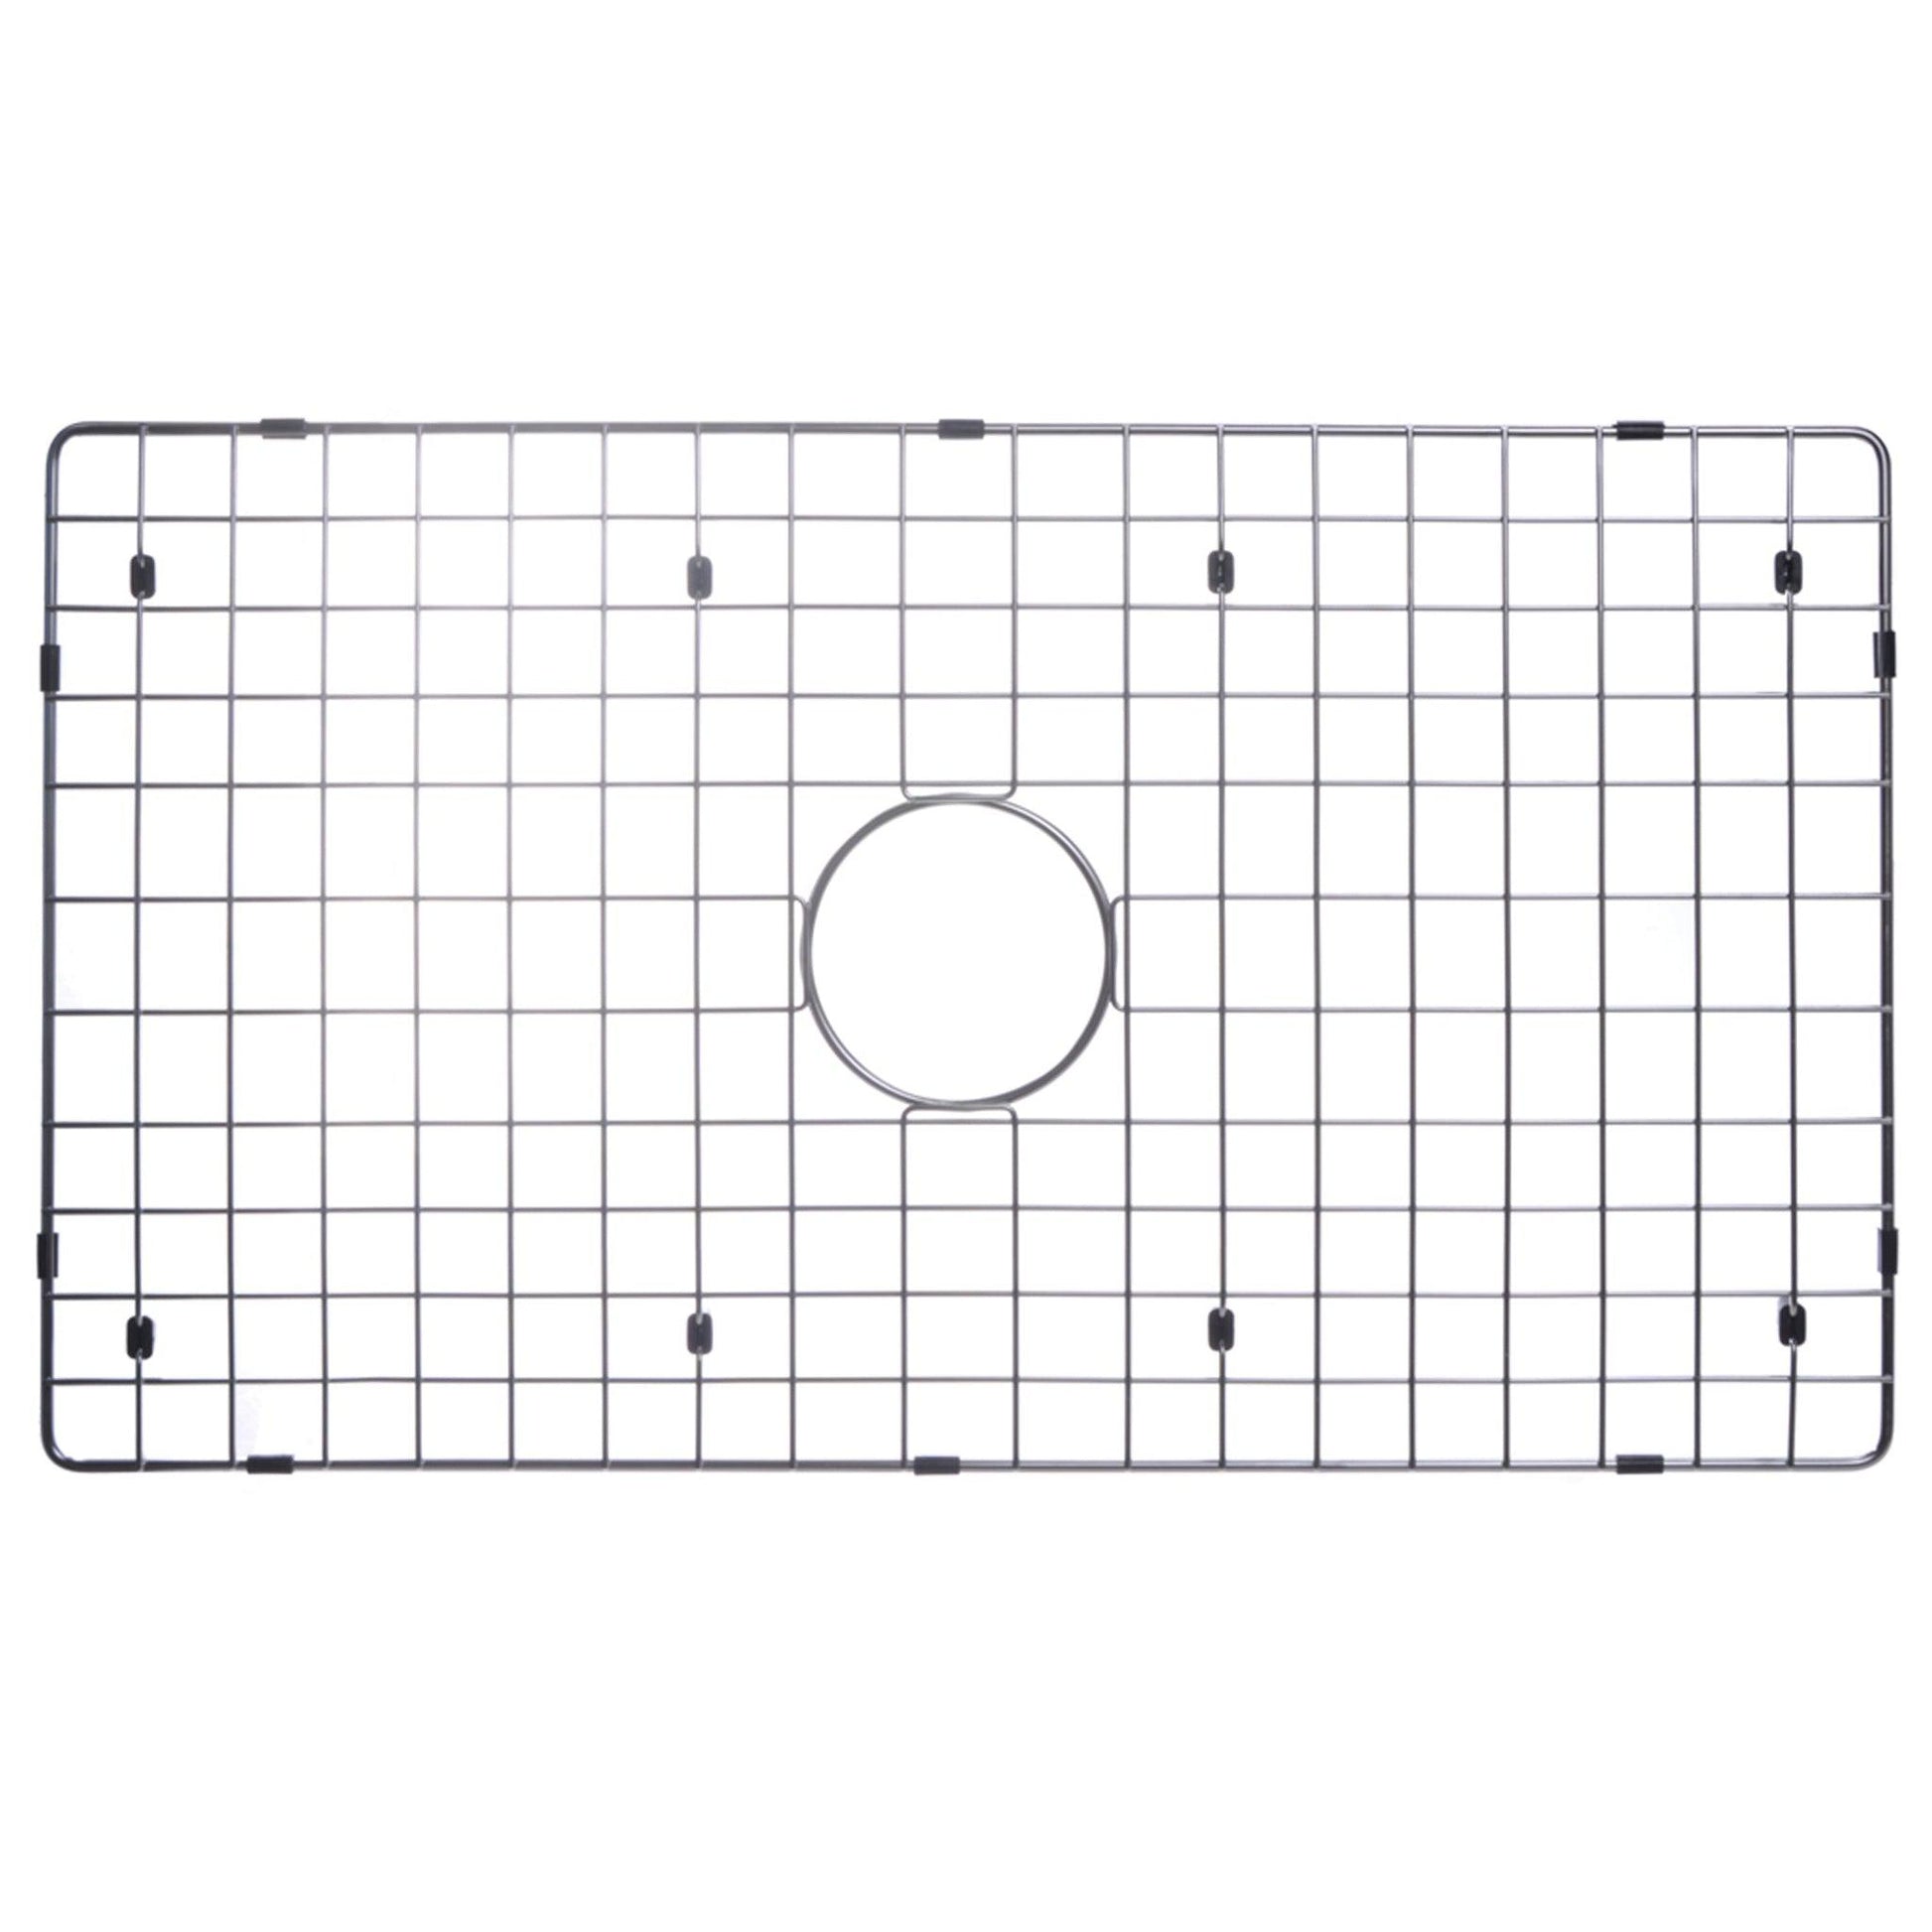 Water Creation Zero Radius Single Bowl Stainless Steel Hand Made Apron Front 33 Inch X 21 Inch Sink With Drain, Strainer, And Bottom Grid